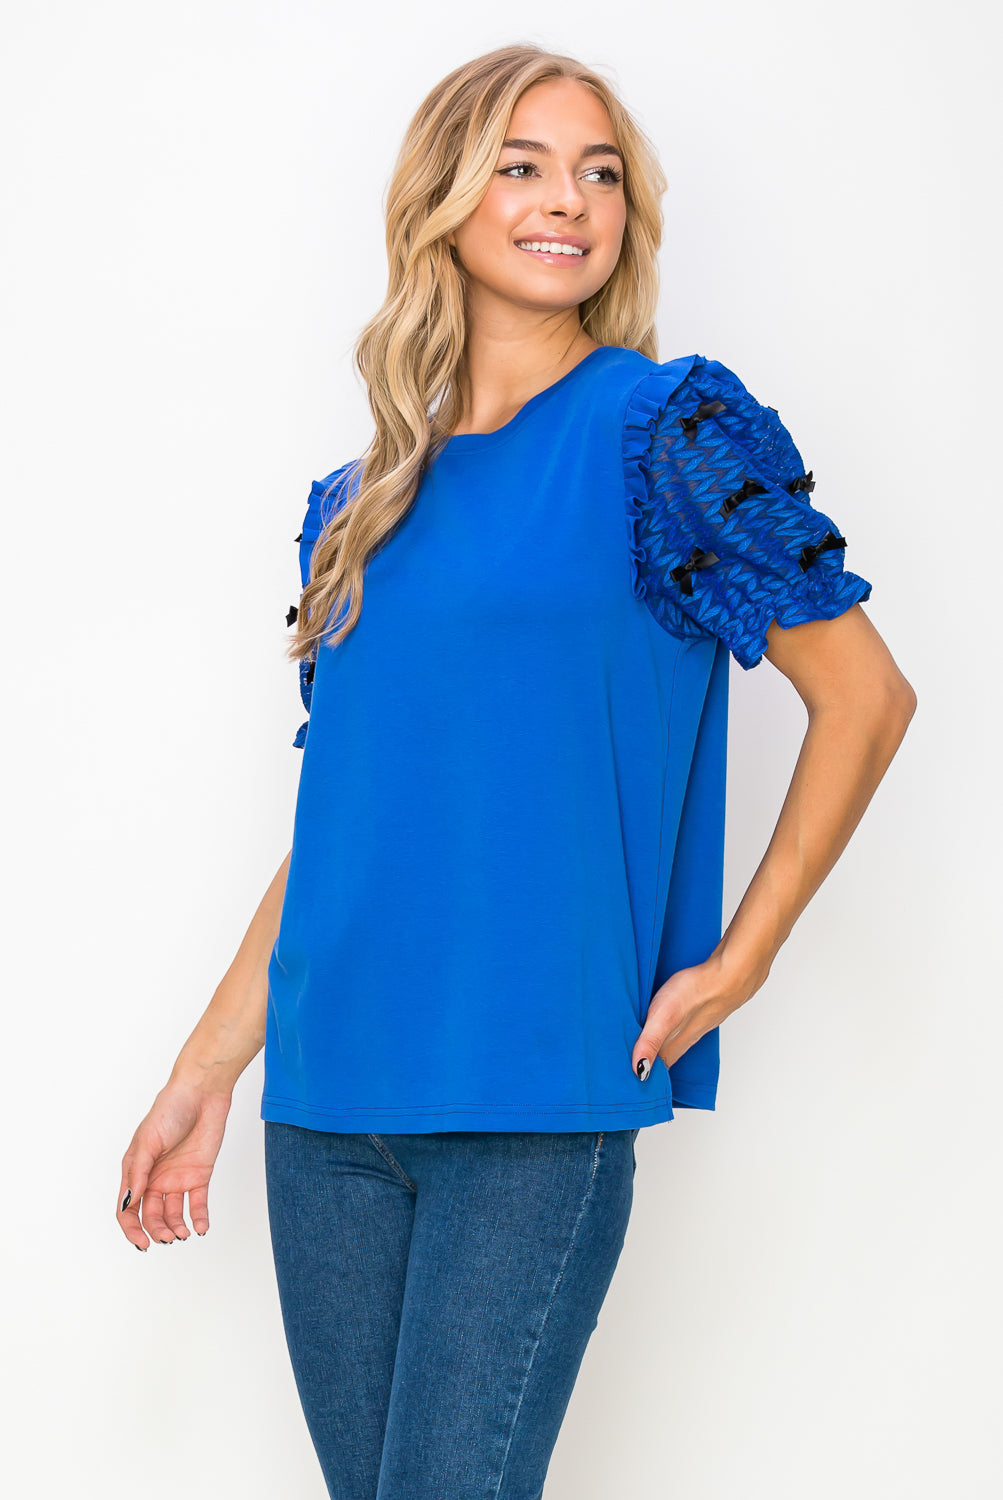 Rorie Pointe Knit Top with Ribbon Bows